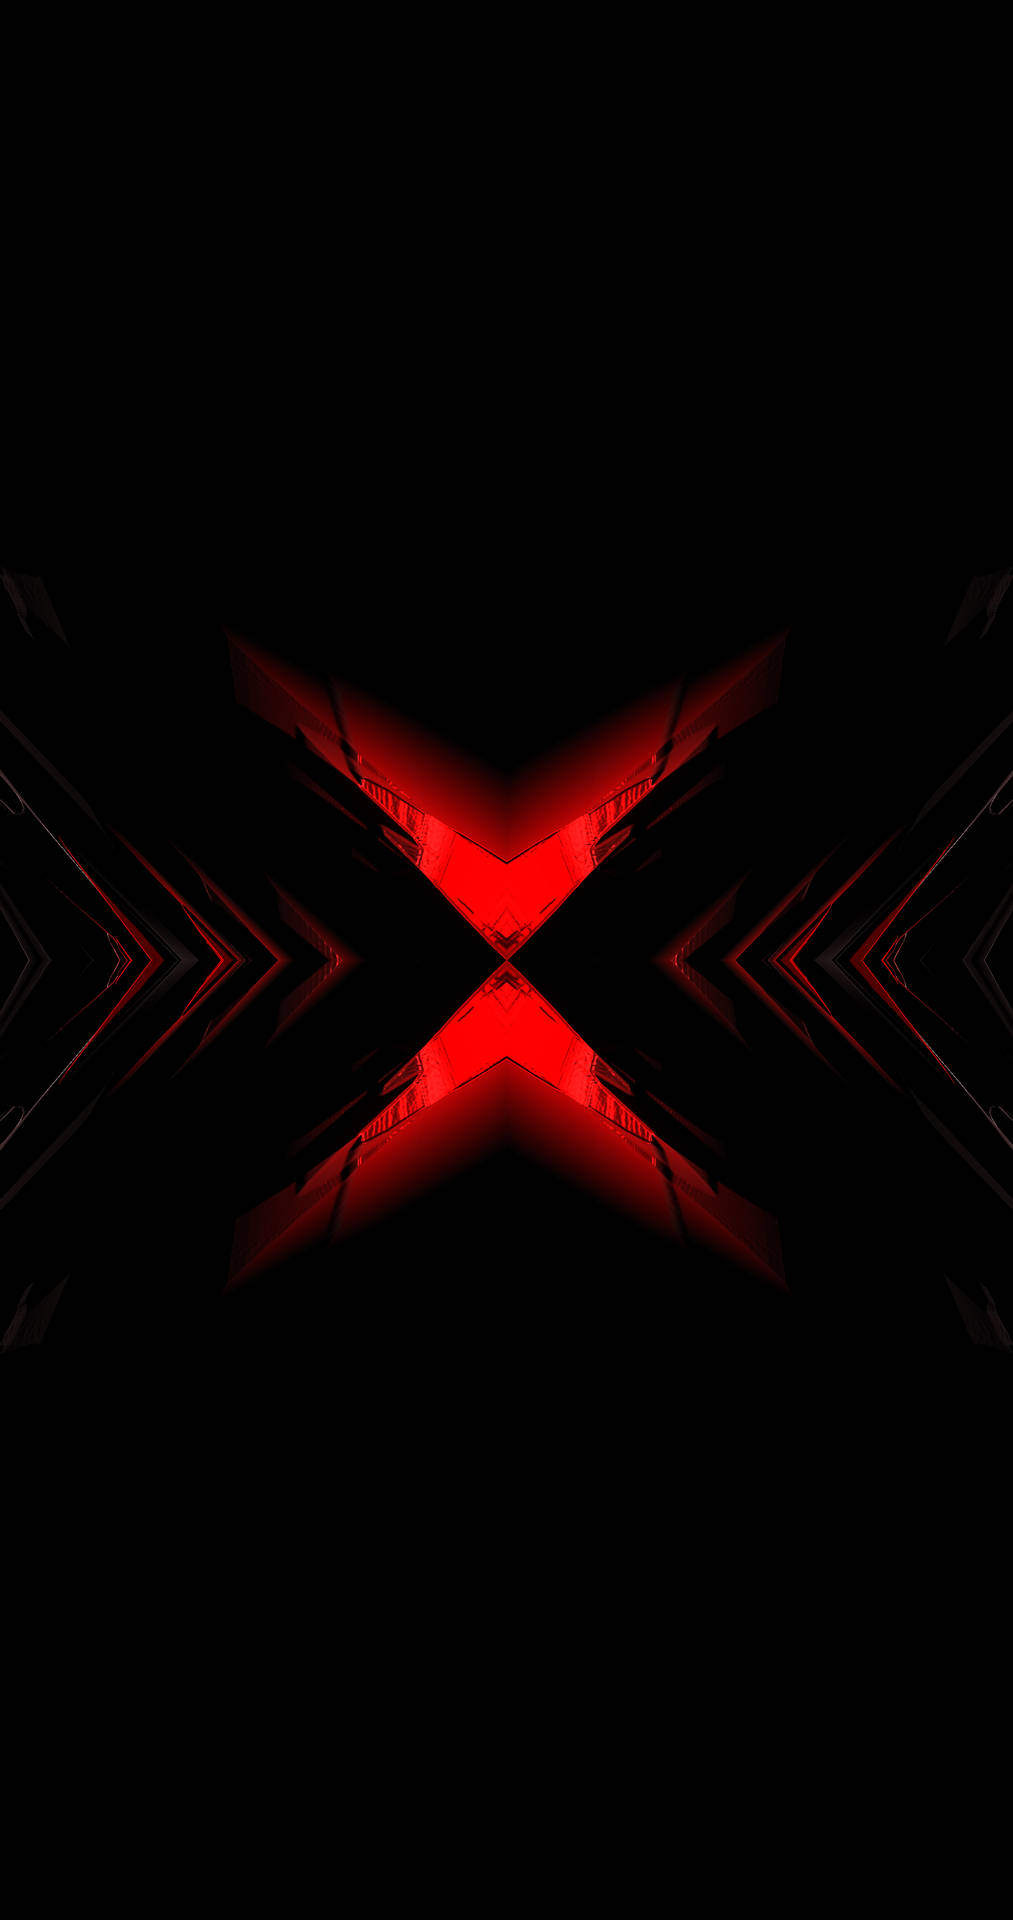 Get lost into the depths of this Red and Black Fractal Art Wallpaper